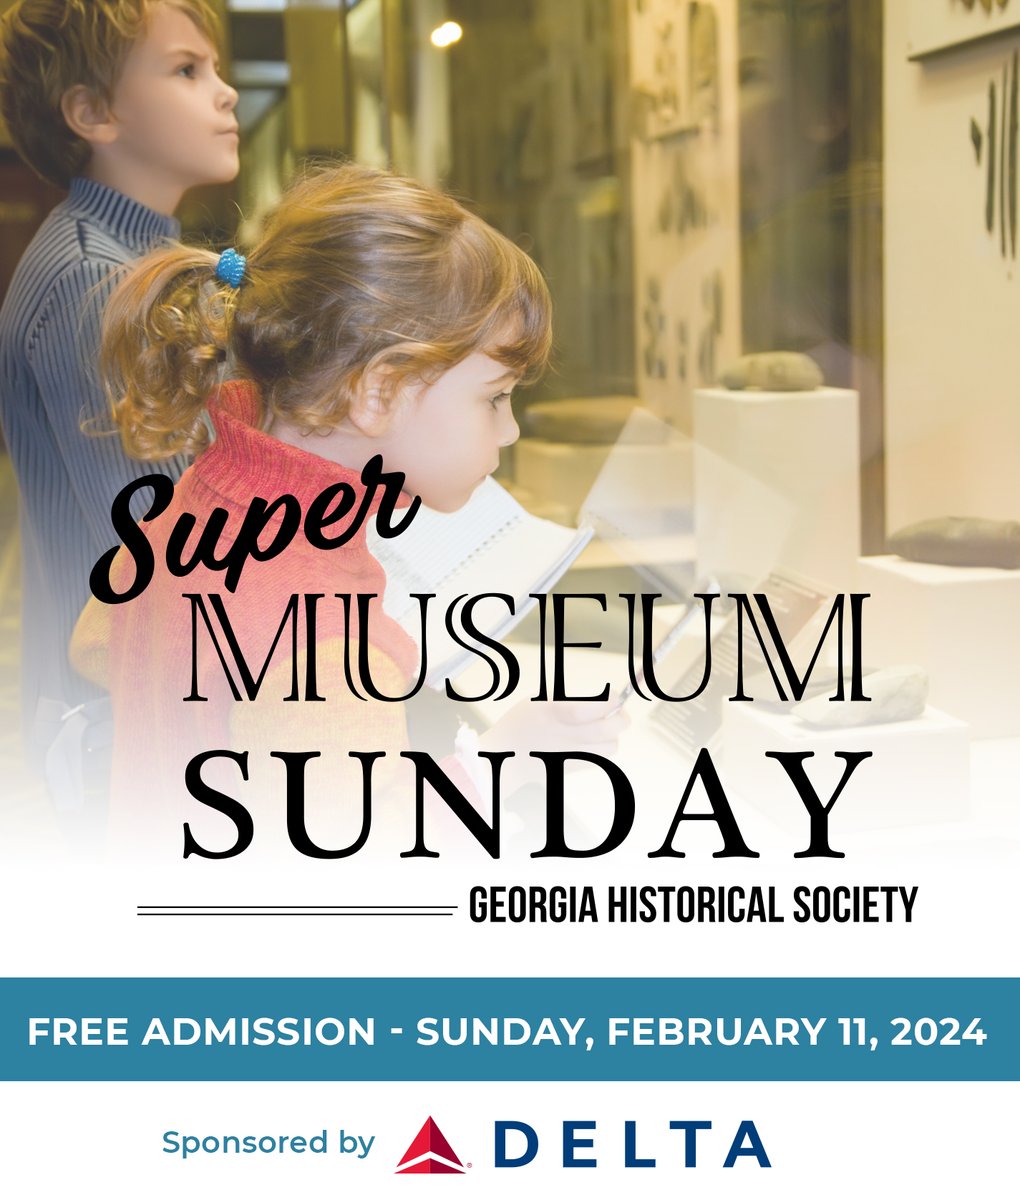 We are honored to participate in Super Museum Sunday this Sunday! We will be open from 12pm to 4pm and admission is  FREE! We look forward to welcoming you!

#shipsoftheseamaritimemuseum #georgiahistoricalsociety #supermuseumsunday